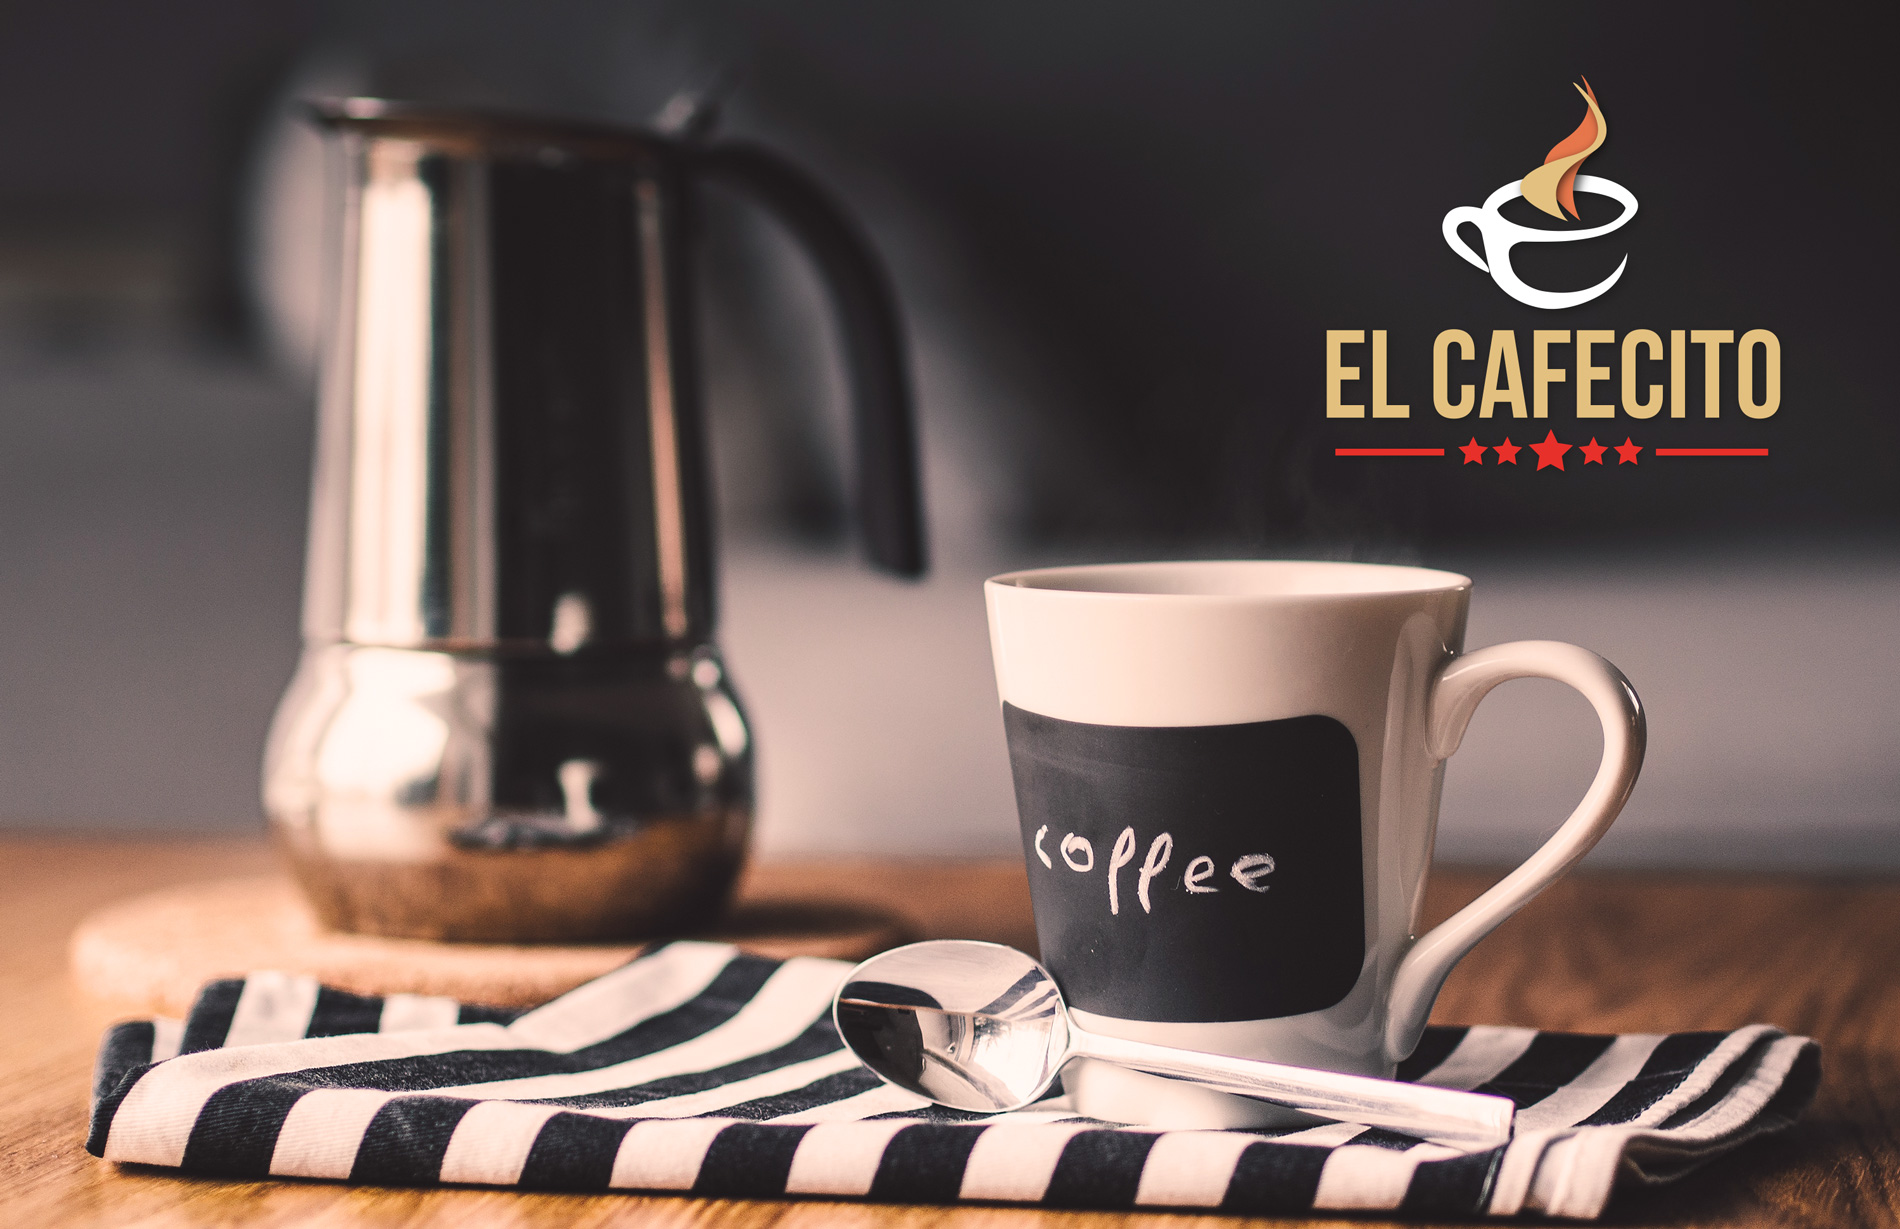 Portfolio of logo and brand design work for coffee shop in Mexico